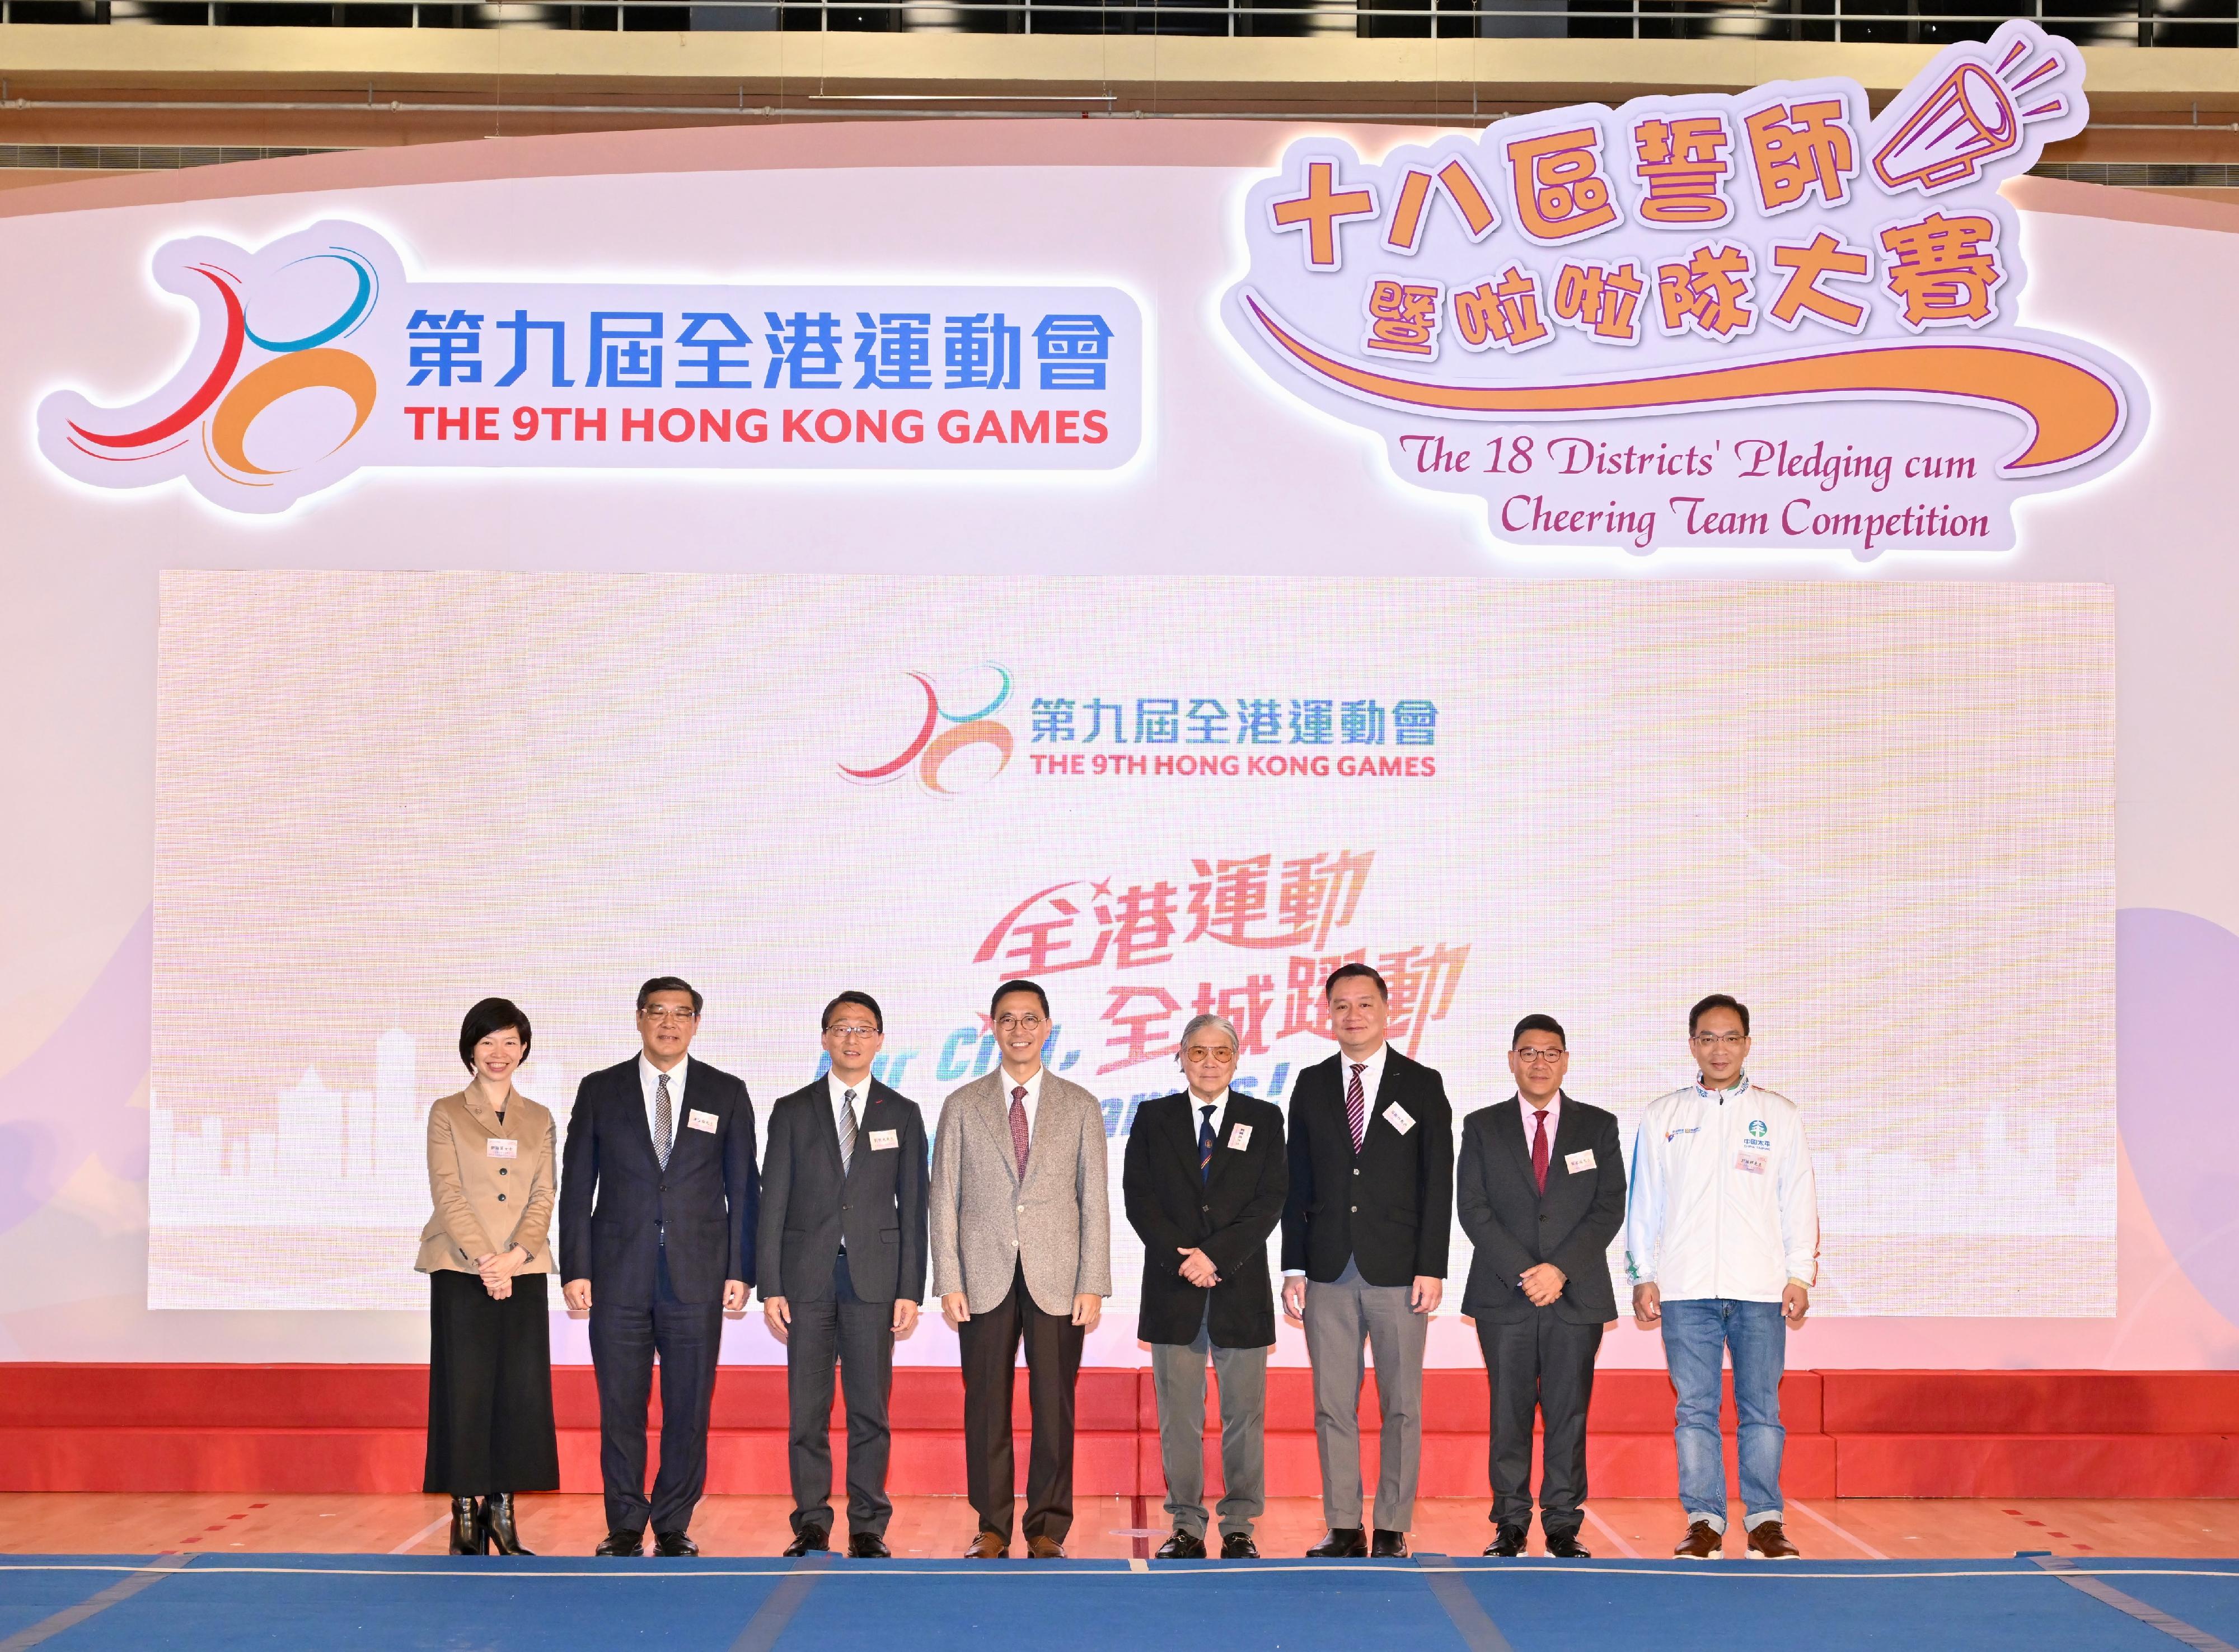 The Secretary for Culture, Sports and Tourism, Mr Kevin Yeung (fourth left); the President of the Sports Federation & Olympic Committee of Hong Kong, China, Mr Timothy Fok (fourth right); the Director of Leisure and Cultural Services, Mr Vincent Liu (third left) ; the Chairman of the 9th Hong Kong Games (HKG) Organising Committee, Professor Patrick Yung (third right); the Executive Advisers of the 9th HKG Organising Committee, Mr William Tong (second left) and Mr David Yip (second right); the Executive Manager of Charities (Sports & Institute of Philanthropy) of the Hong Kong Jockey Club, Ms Donna Tang (first left); and the Deputy General Manager of China Taiping Insurance (HK) Company Limited, Mr Kwok Tuen-cheung (first right), officiate at the 18 Districts' Pledging cum Cheering Team Competition of the 9th HKG today (February 25).